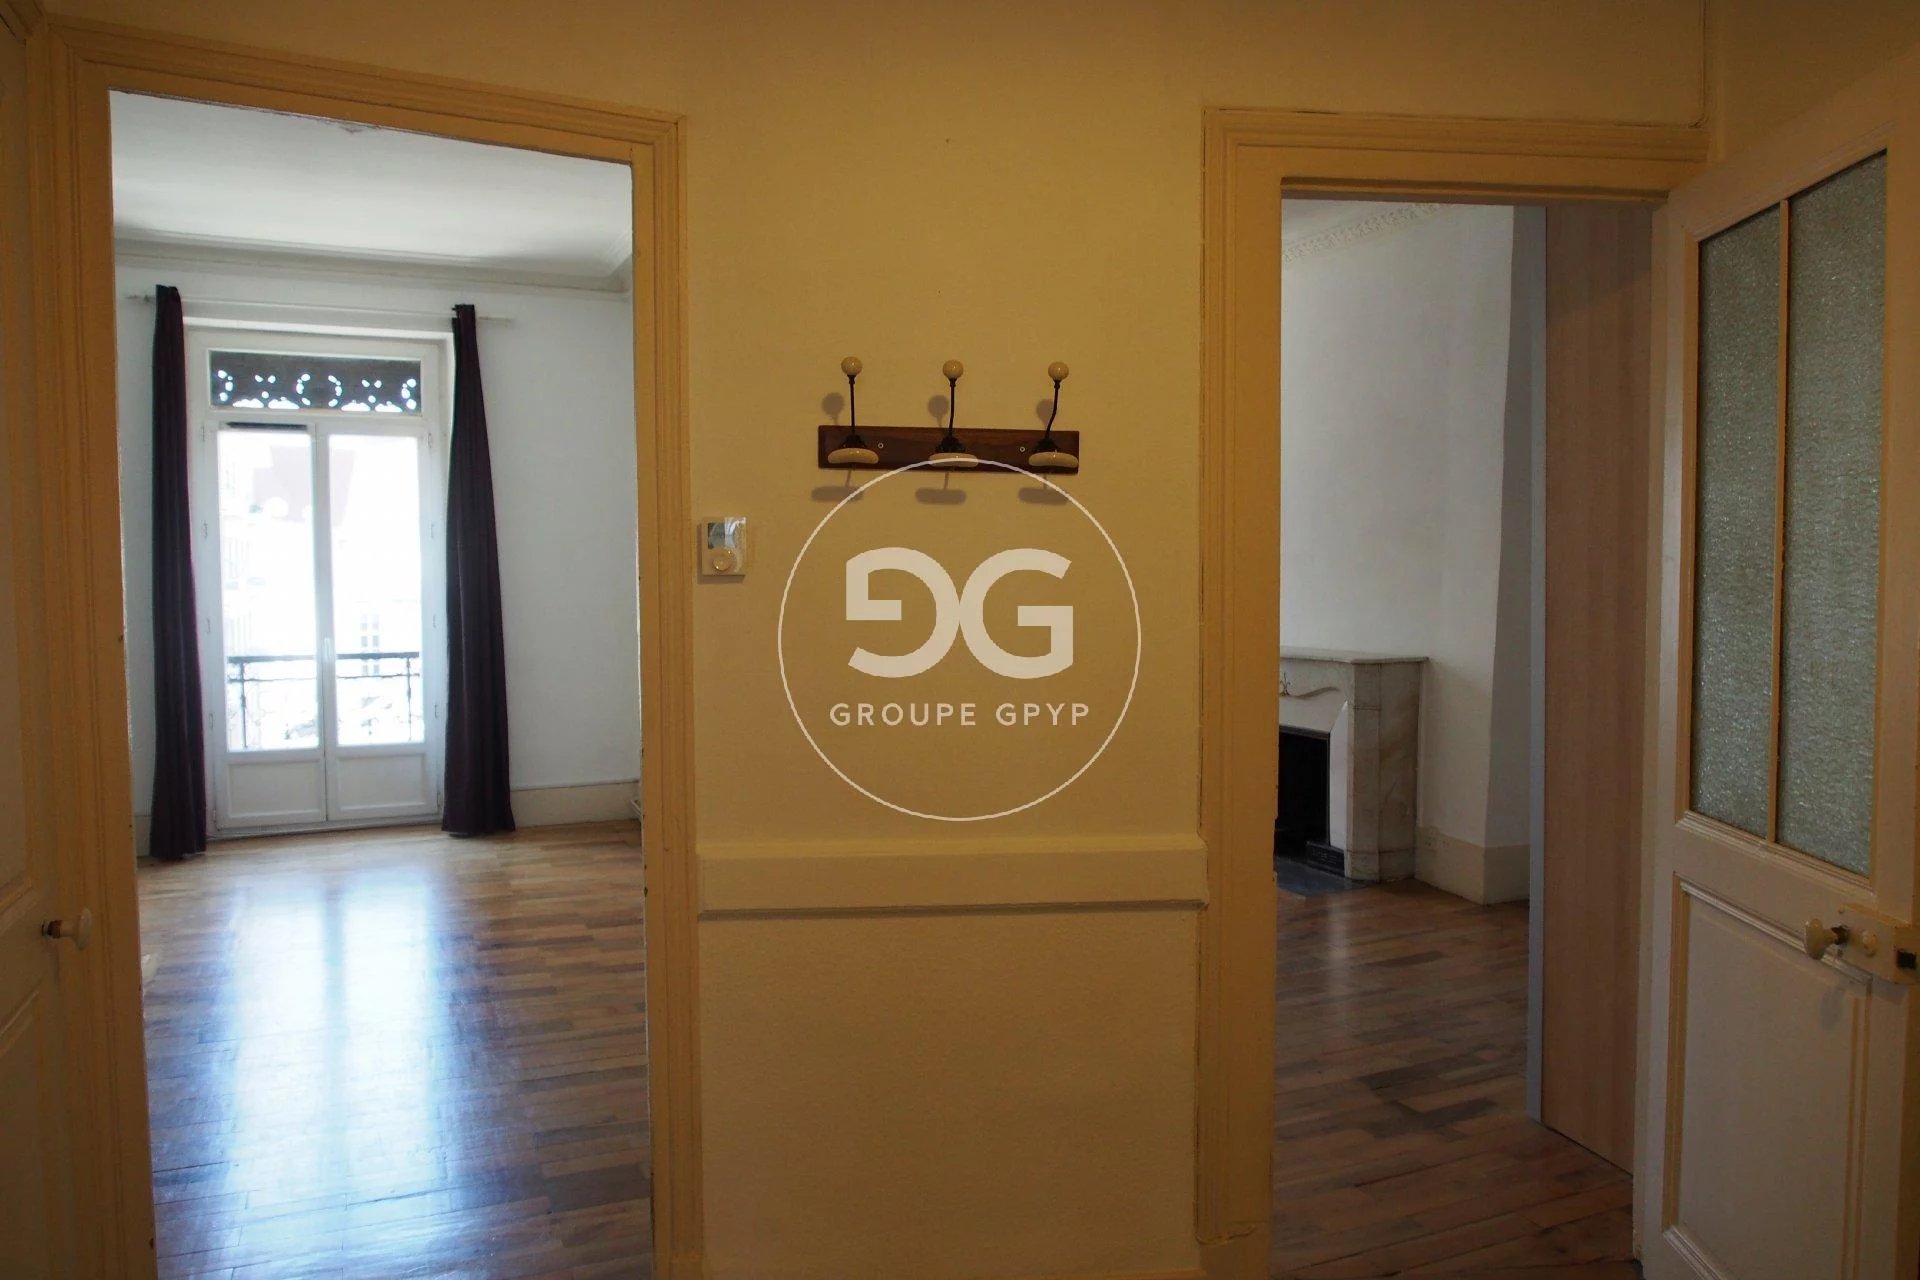 Large 60.11m², one bedroom apartment in central Grenoble